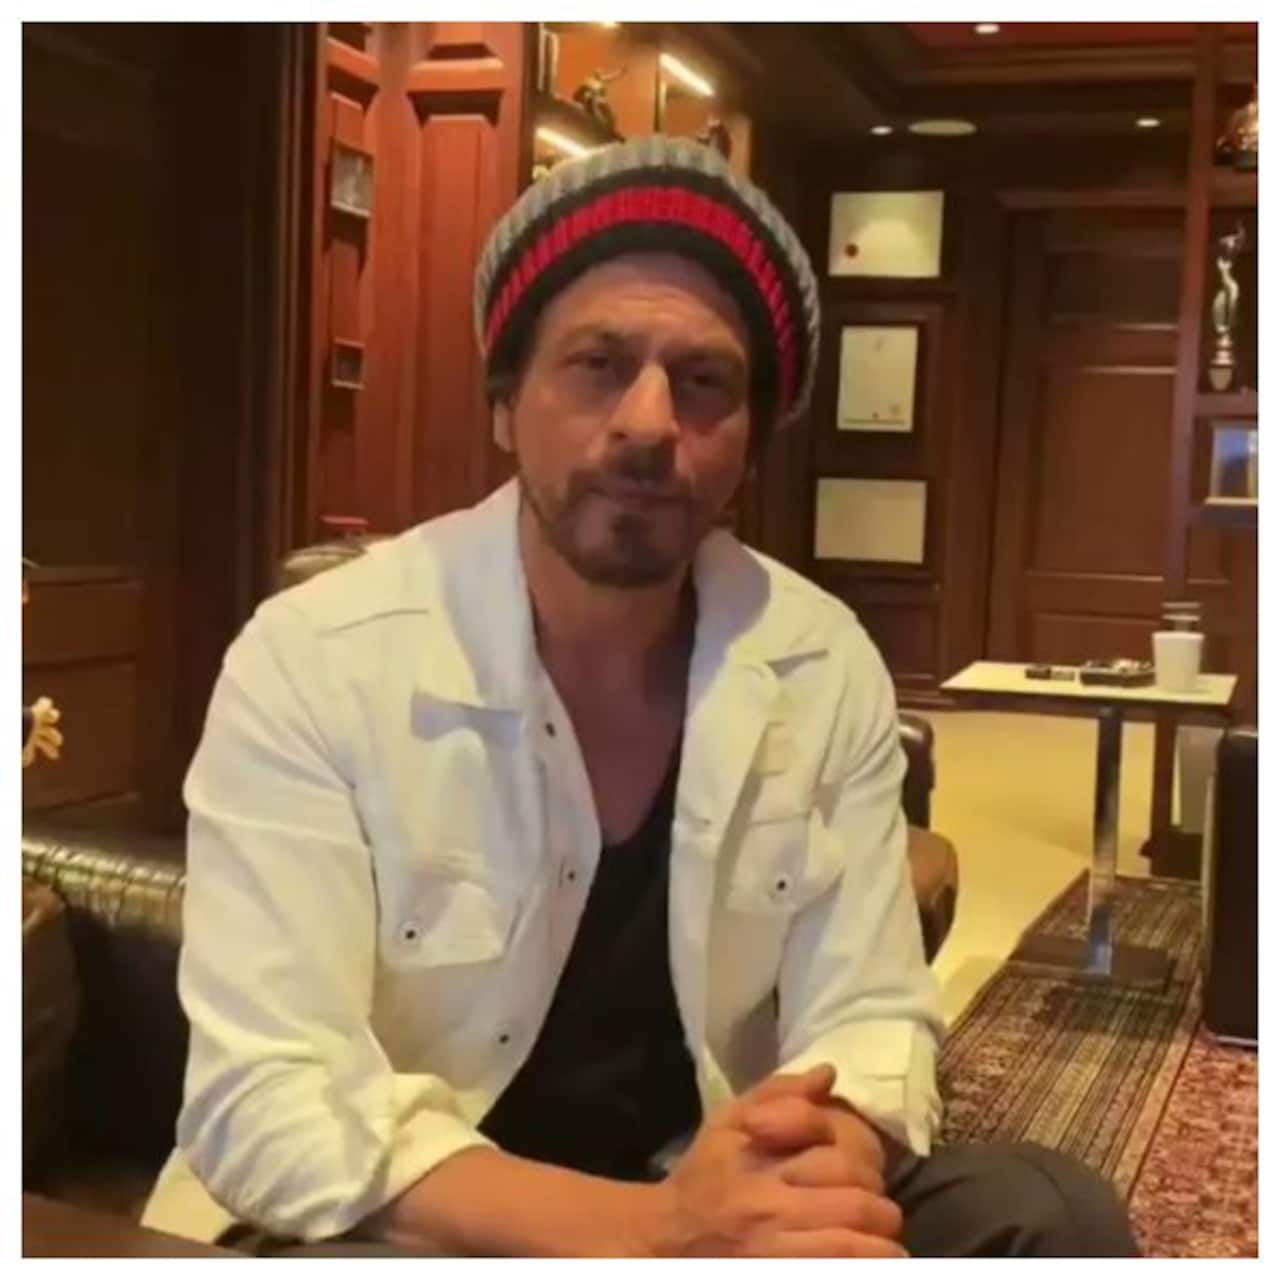 Coronavirus pandemic: Shah Rukh Khan urges fans to stay indoors in new video